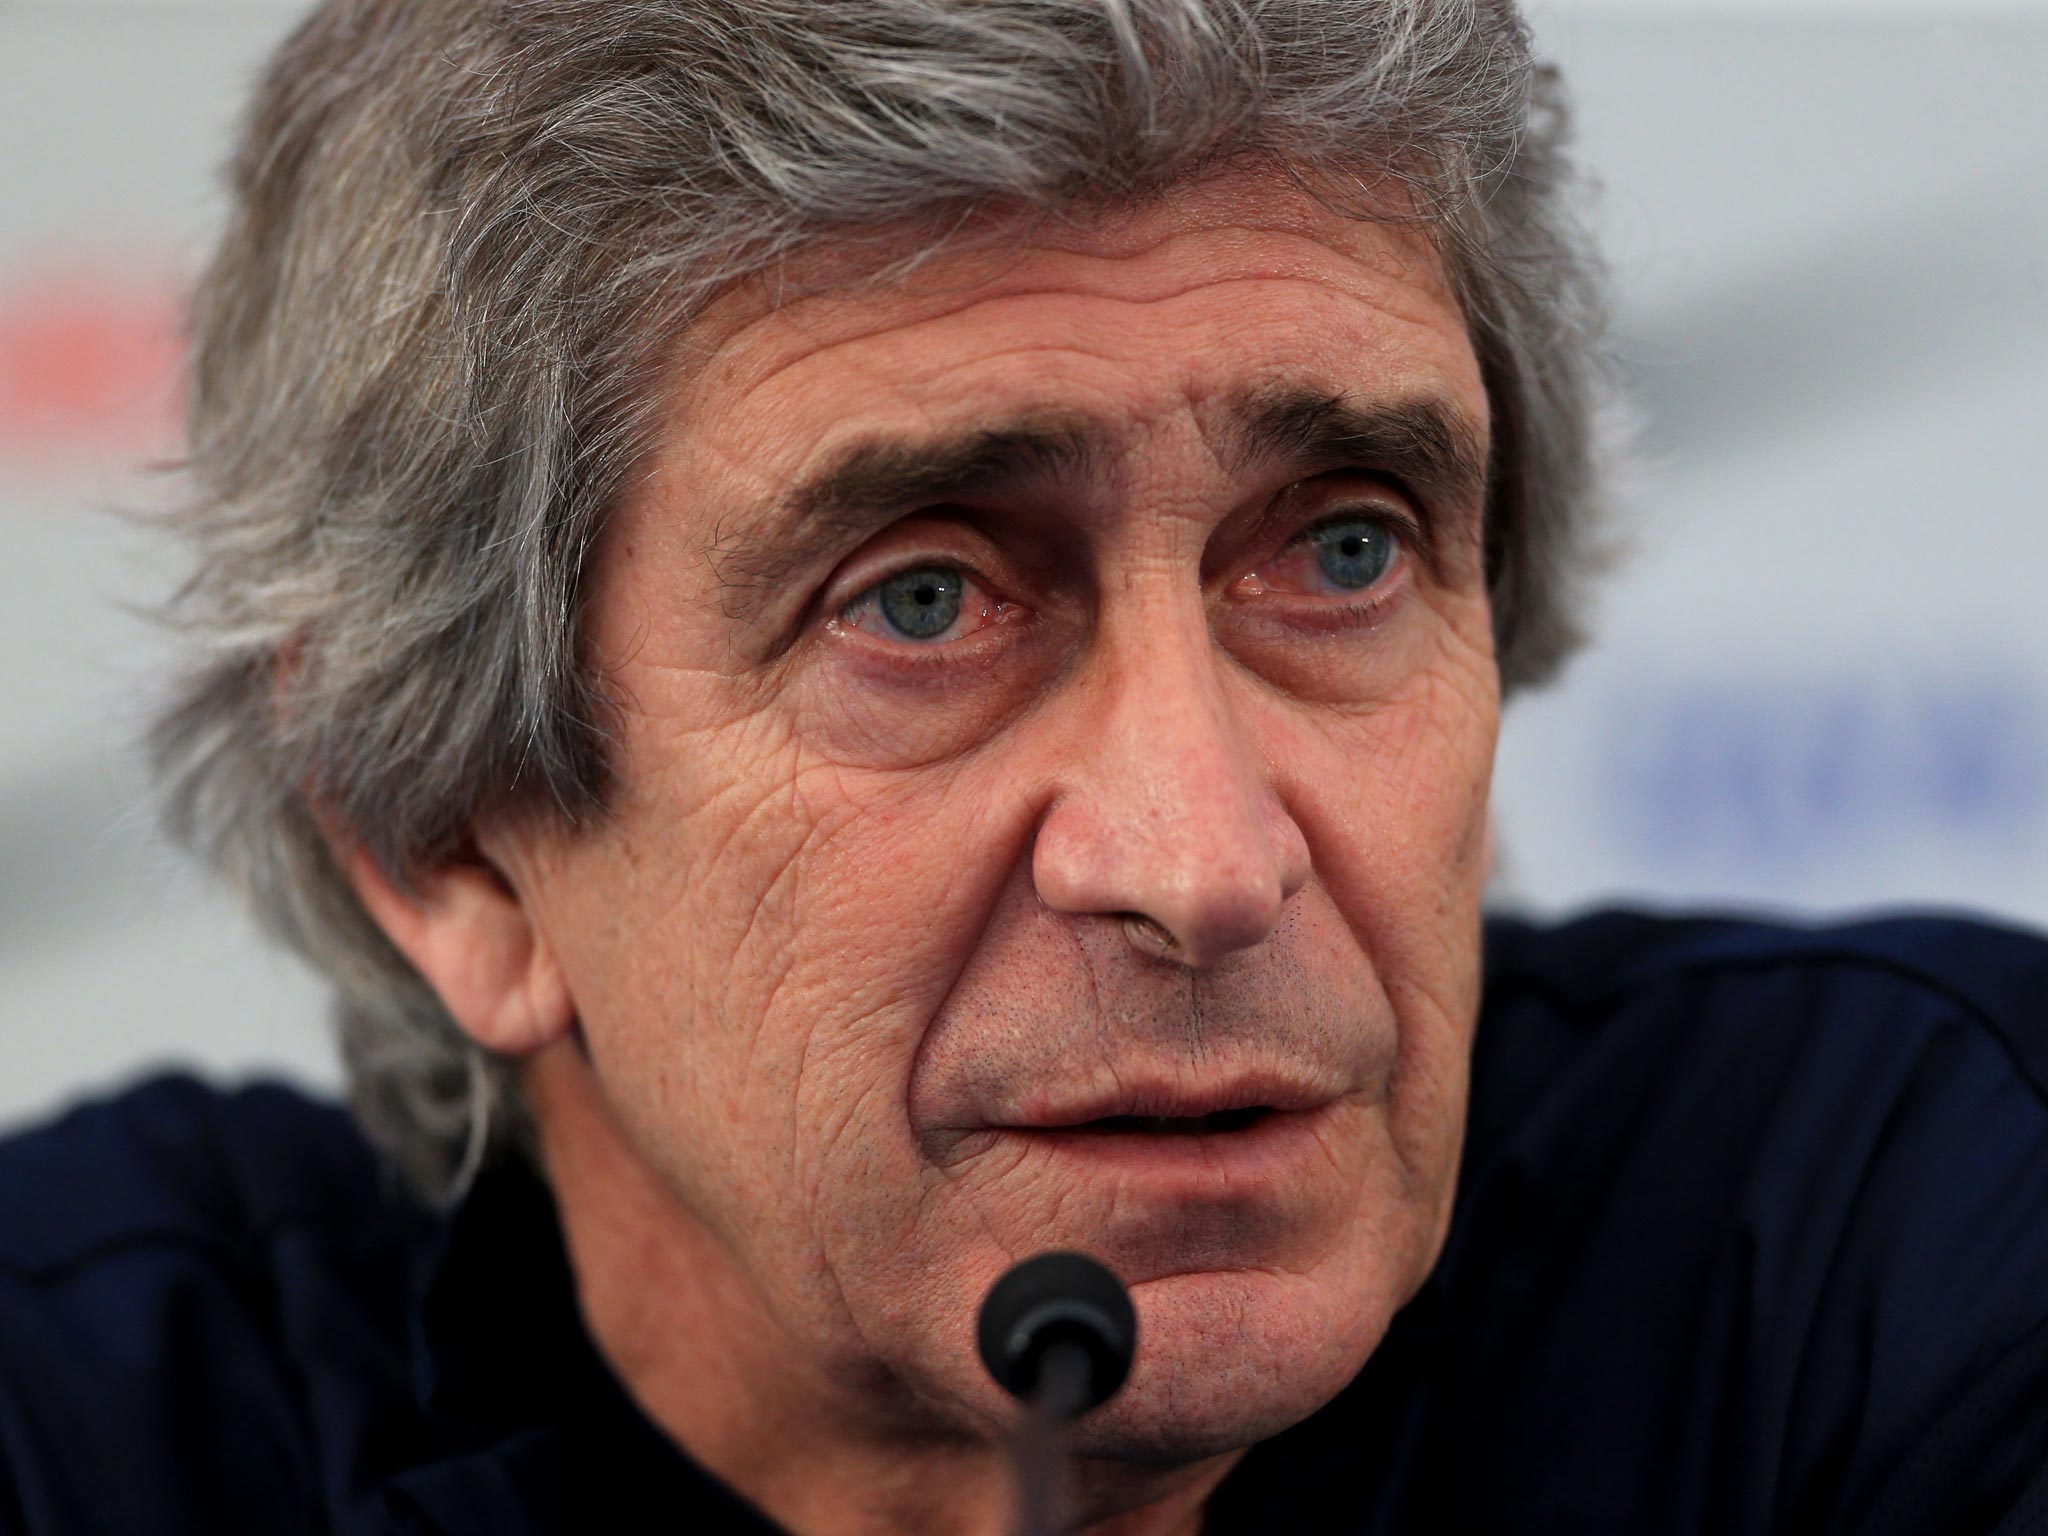 Manchester City Manager Manuel Pellegrini has been handed a two-match touchline ban by Uefa